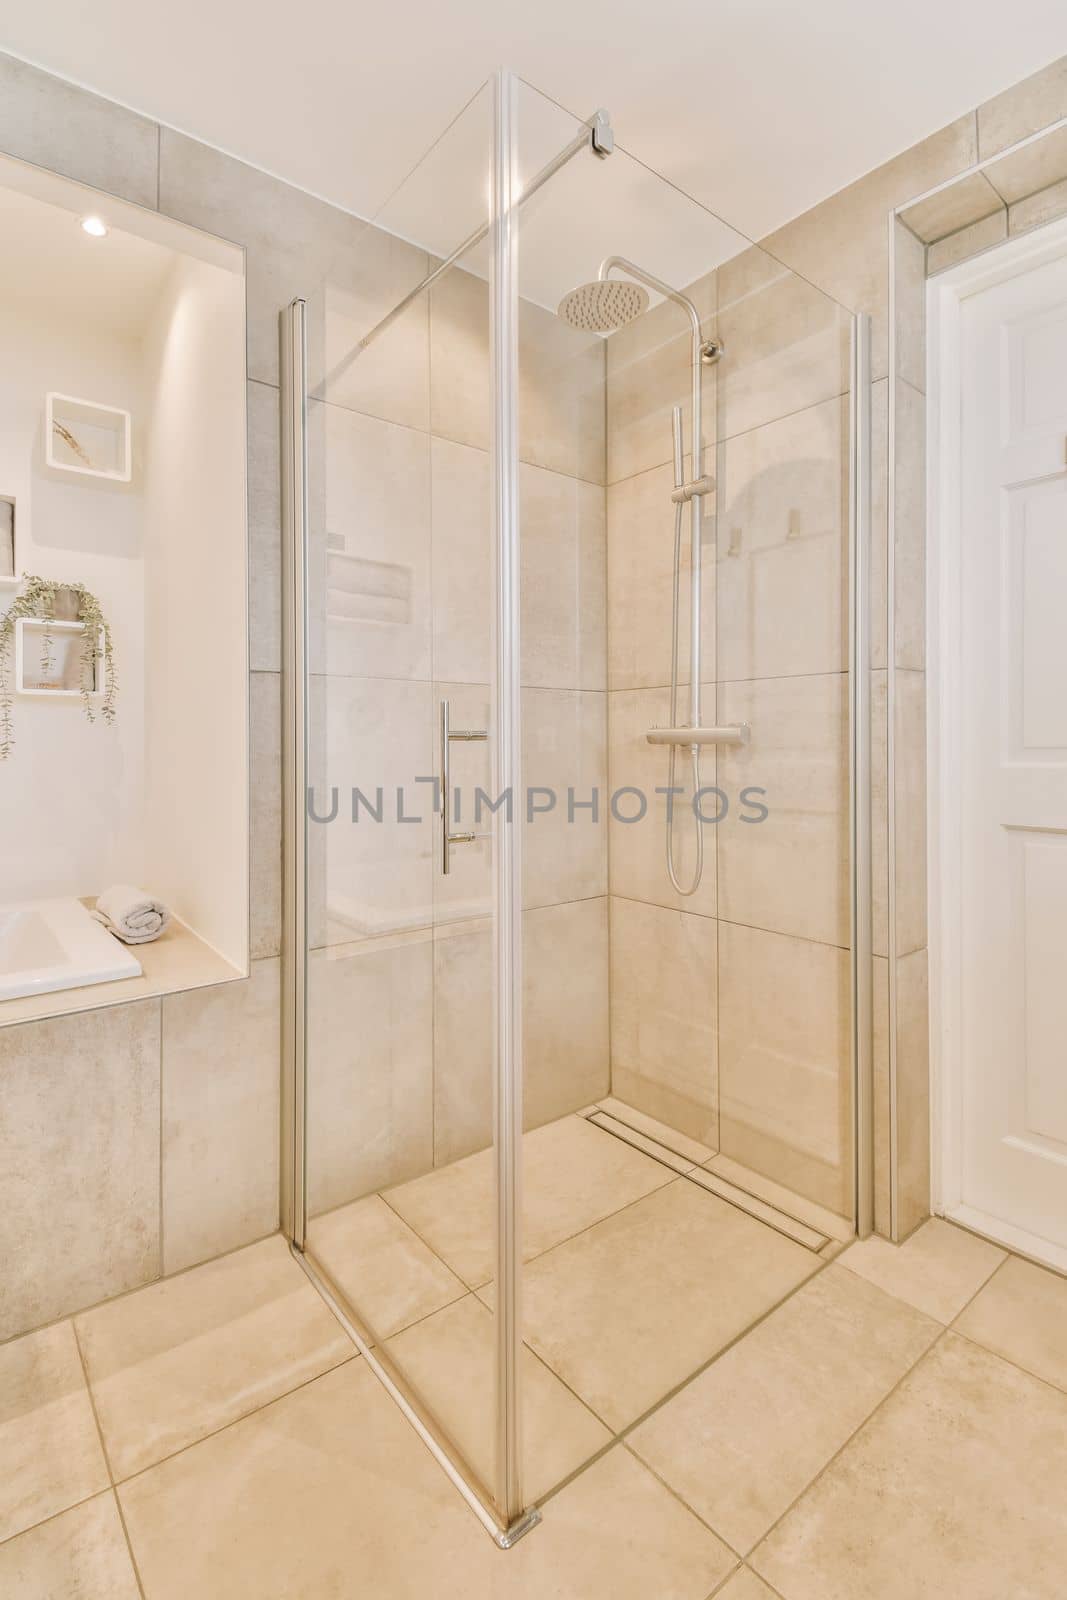 a bathroom with a shower stall and toilet in the corner next to the bathtub on the right is an open door